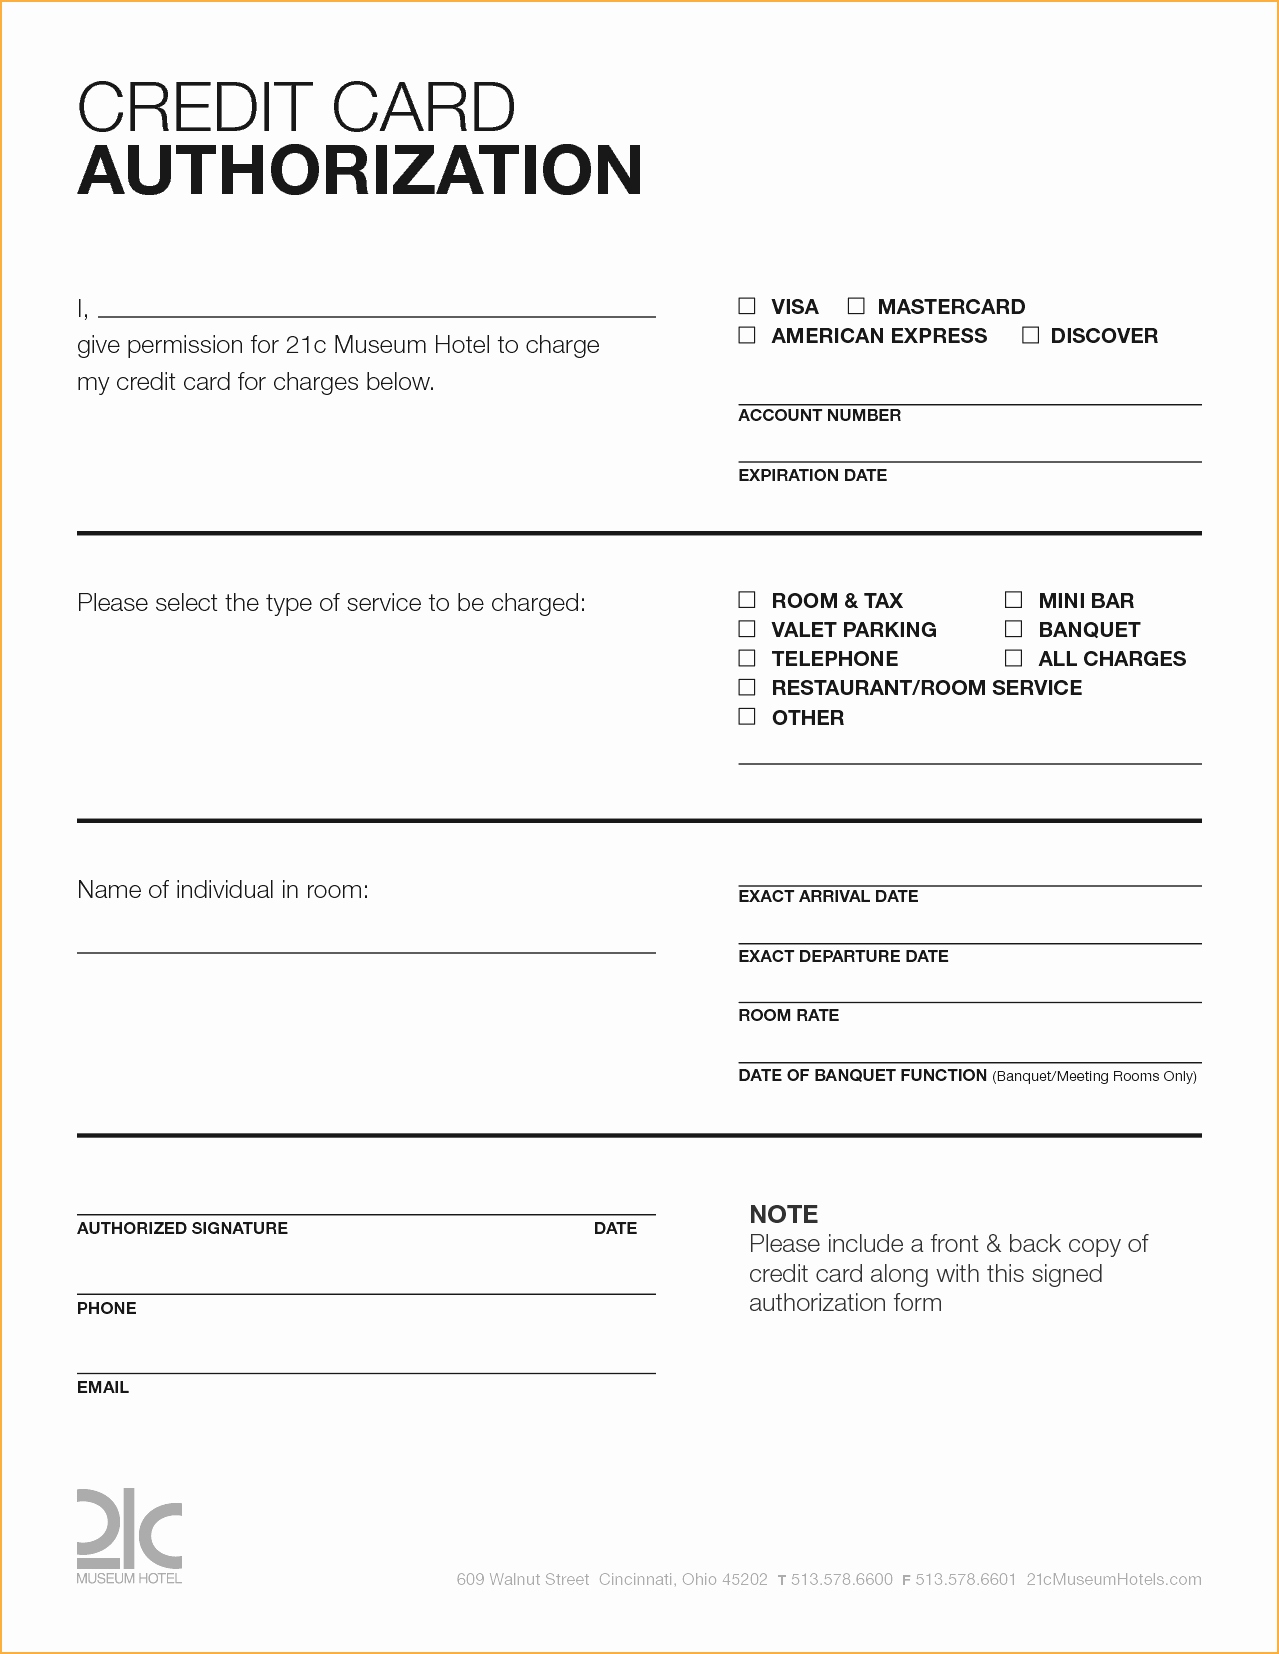 Credit Card Authorization Form Templates 6461